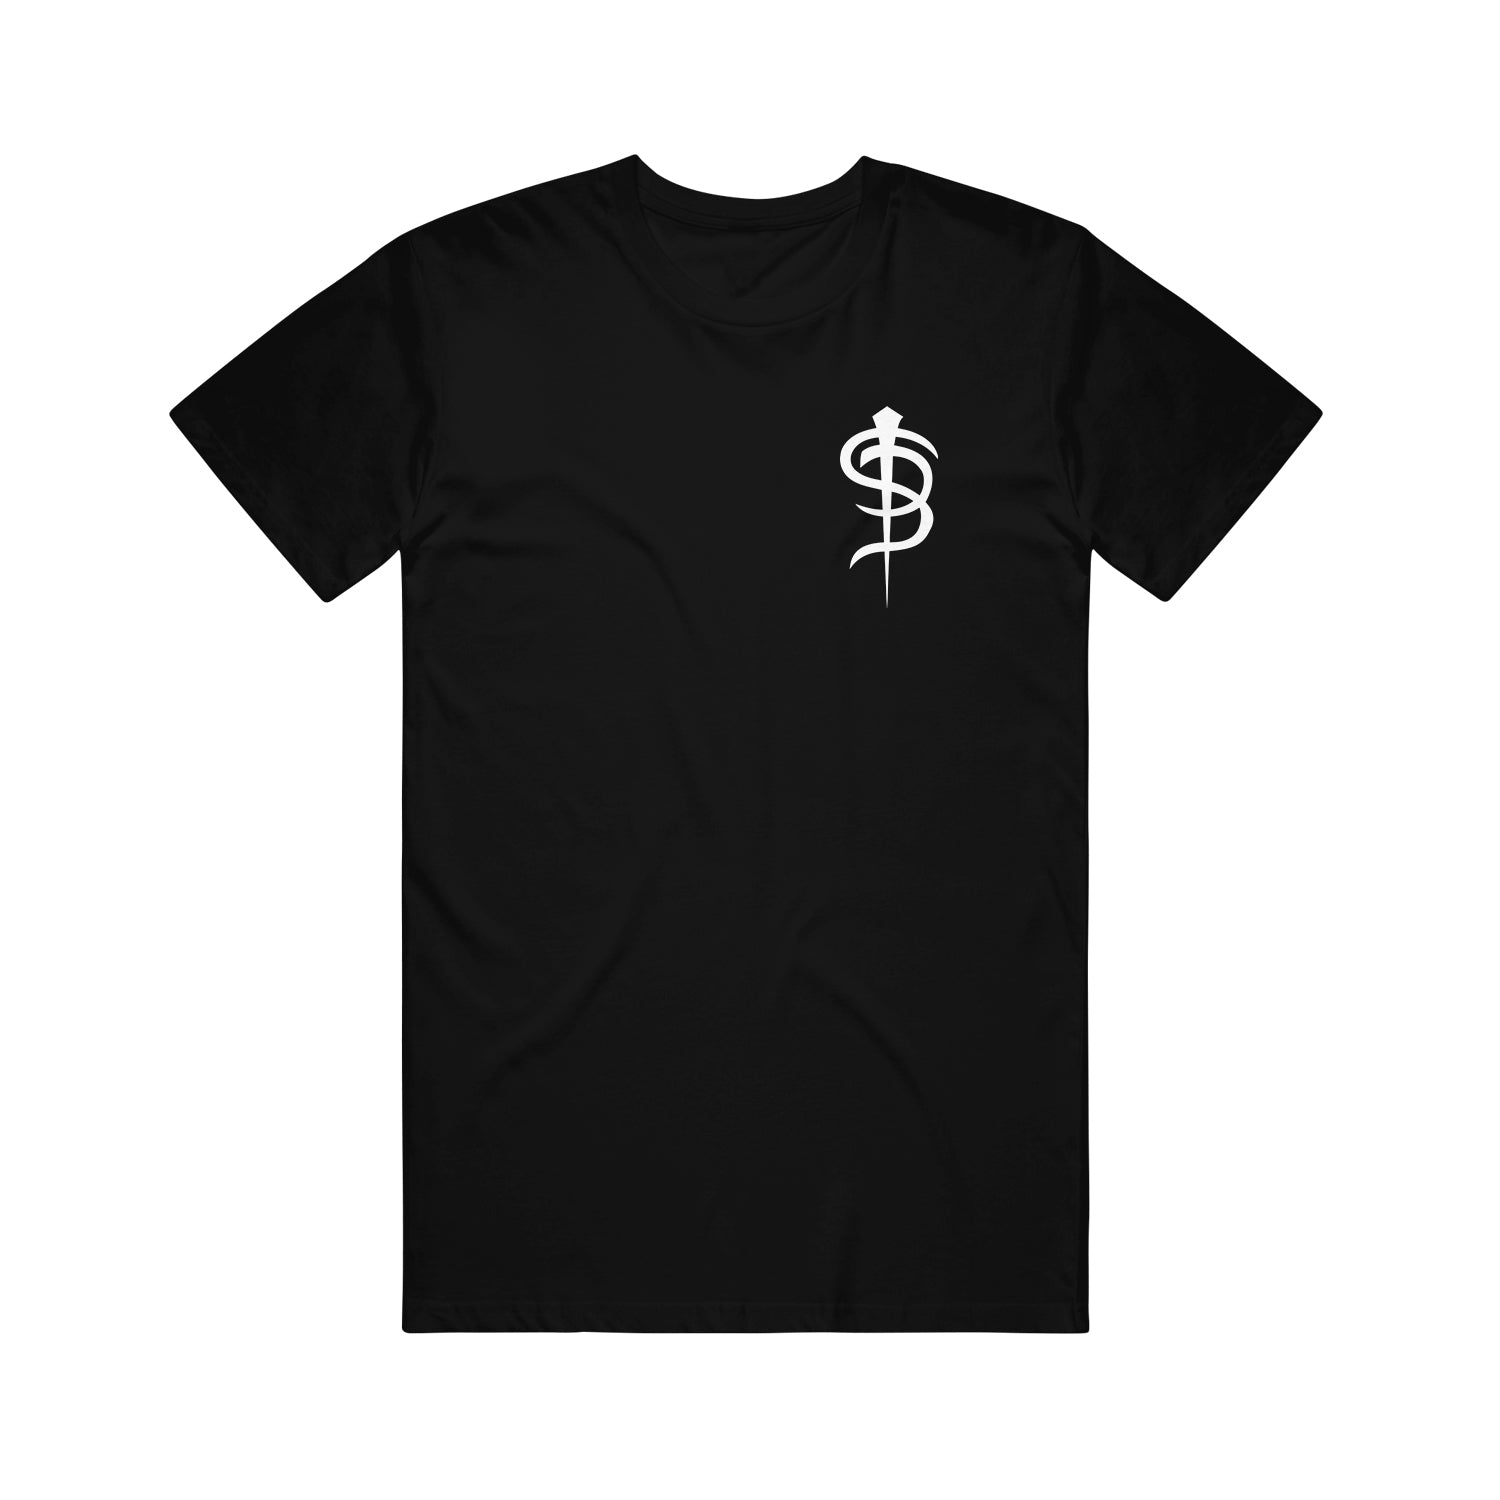  Image of the front of a Black tshirt on a white background. The front of the shirt on the left chest is the skinny puppy SP logo in white.